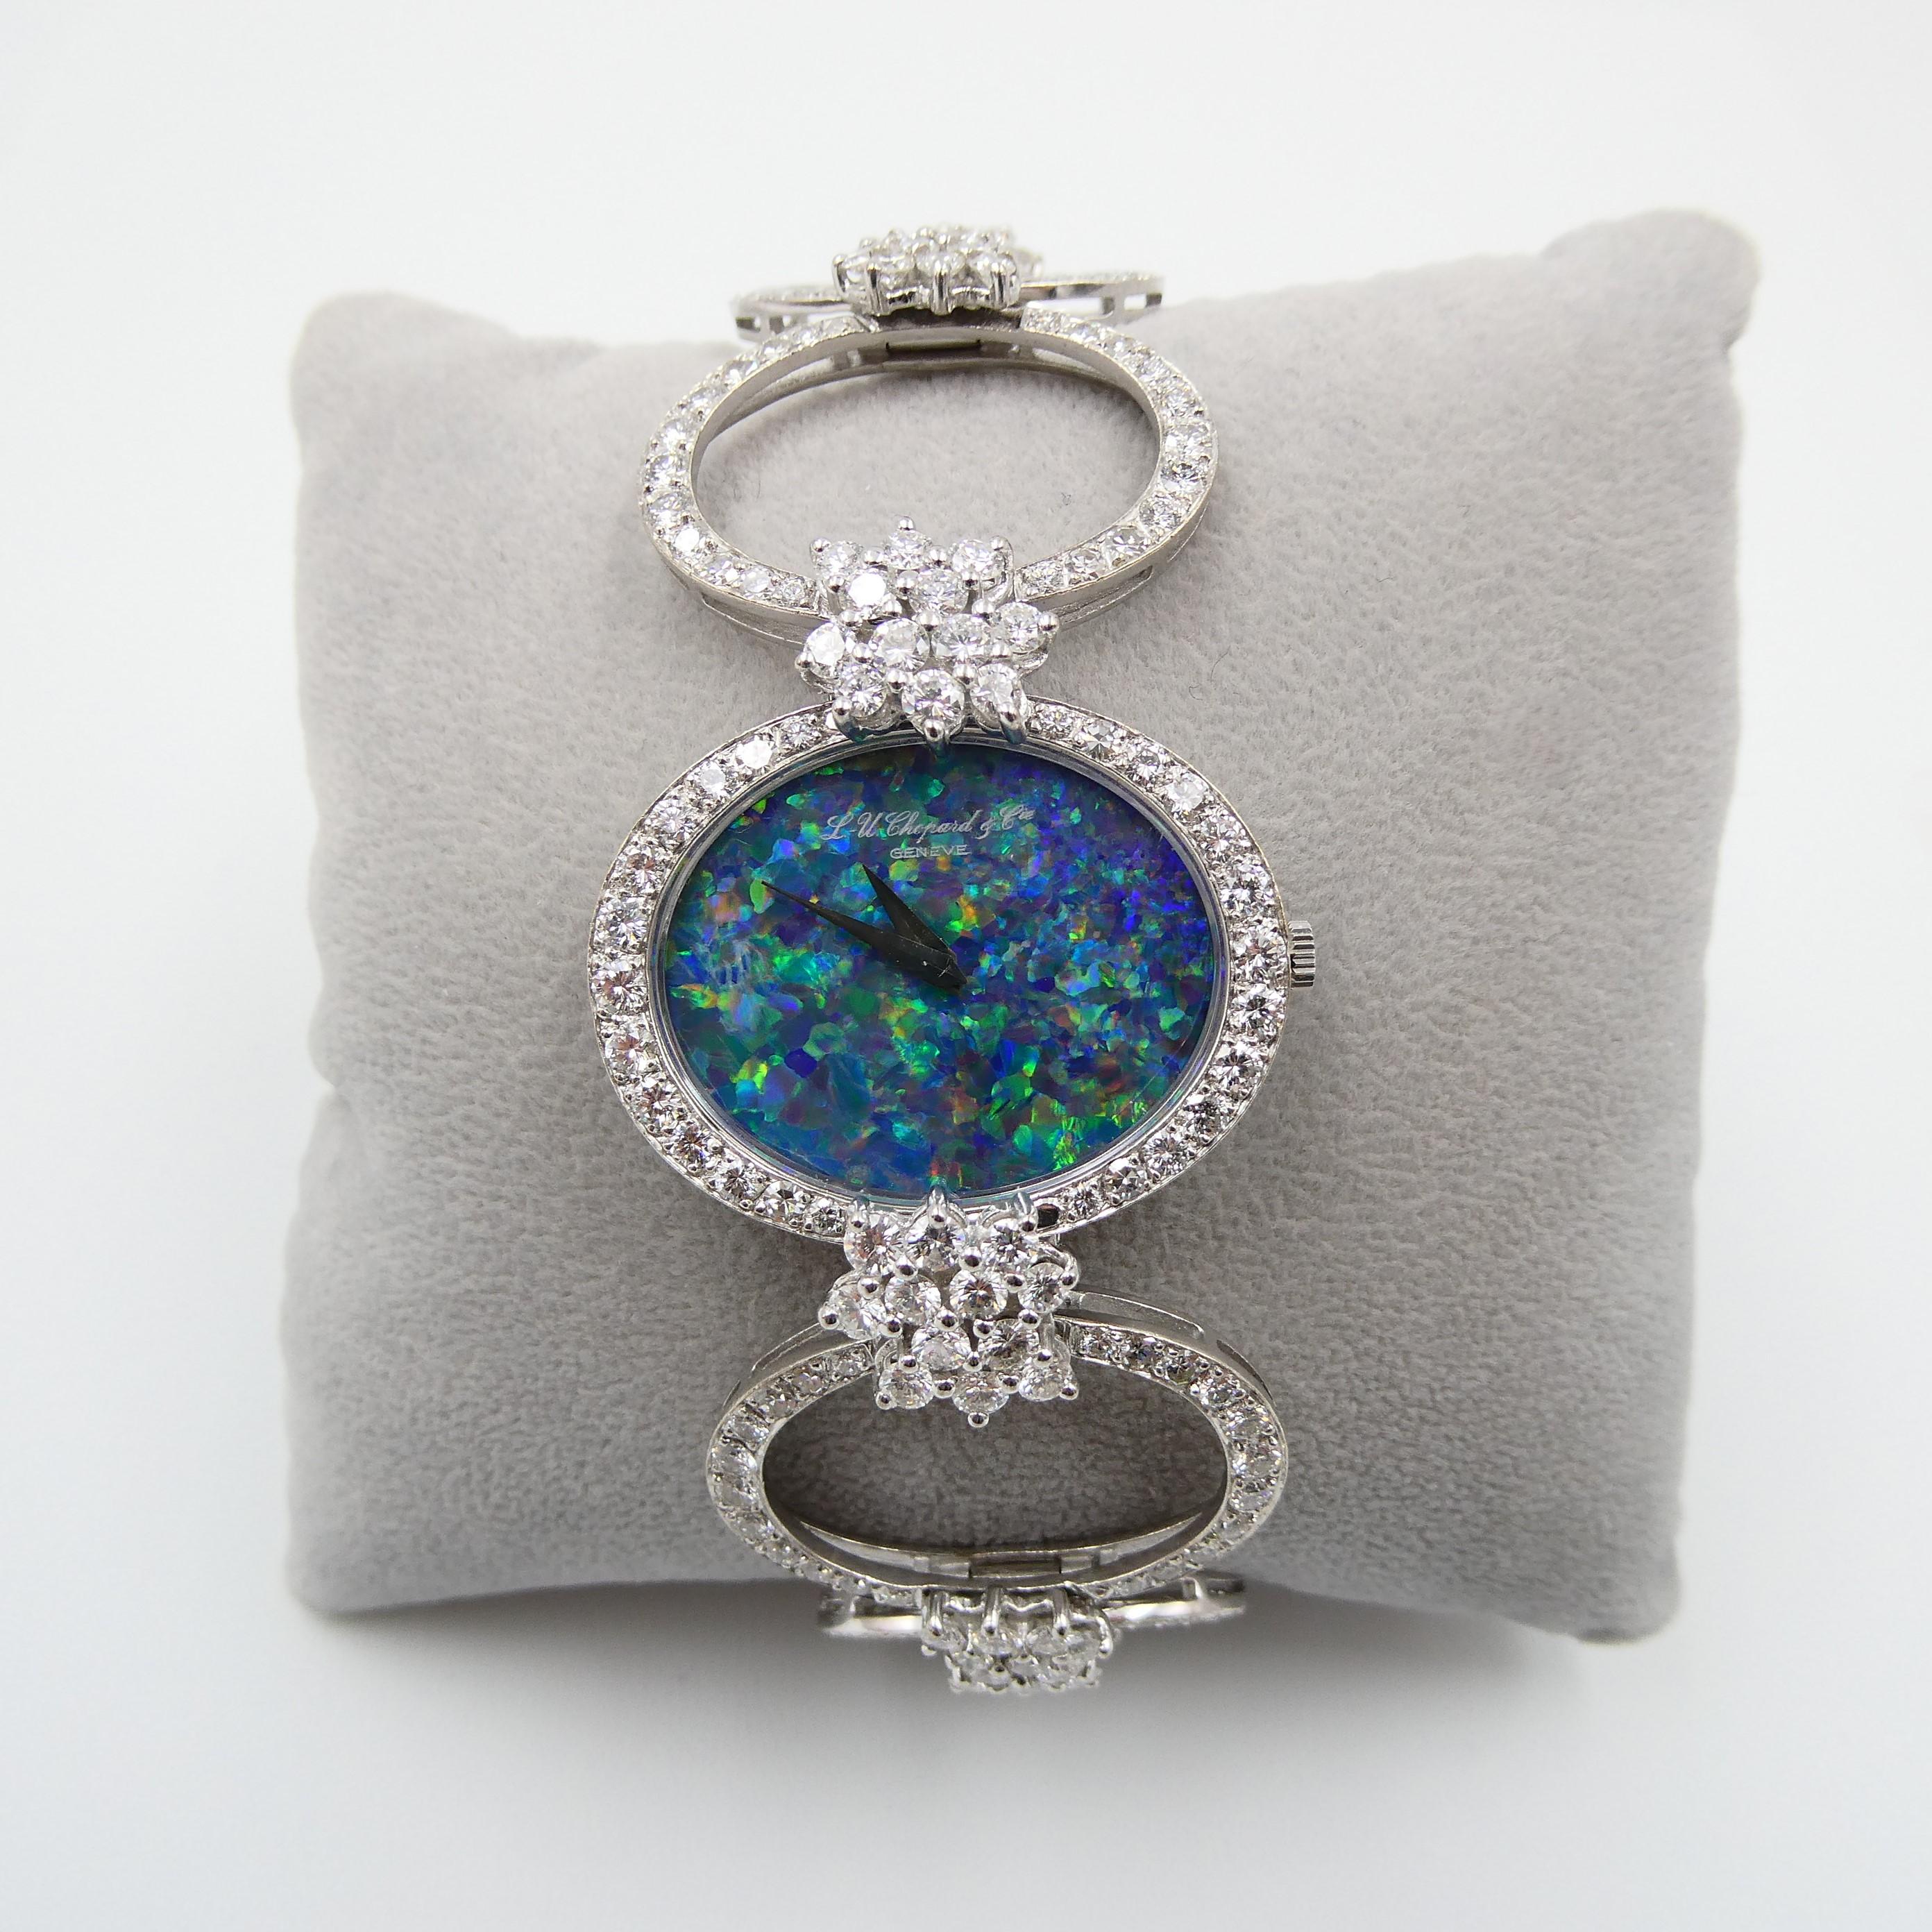 Experience the enduring allure of the Chopard Black Opal and Diamond Watch, a true masterpiece hailing from the fashionable 1970s era. Meticulously crafted with an unwavering focus on detail, it highlights an exquisite 18 Karat white gold bracelet